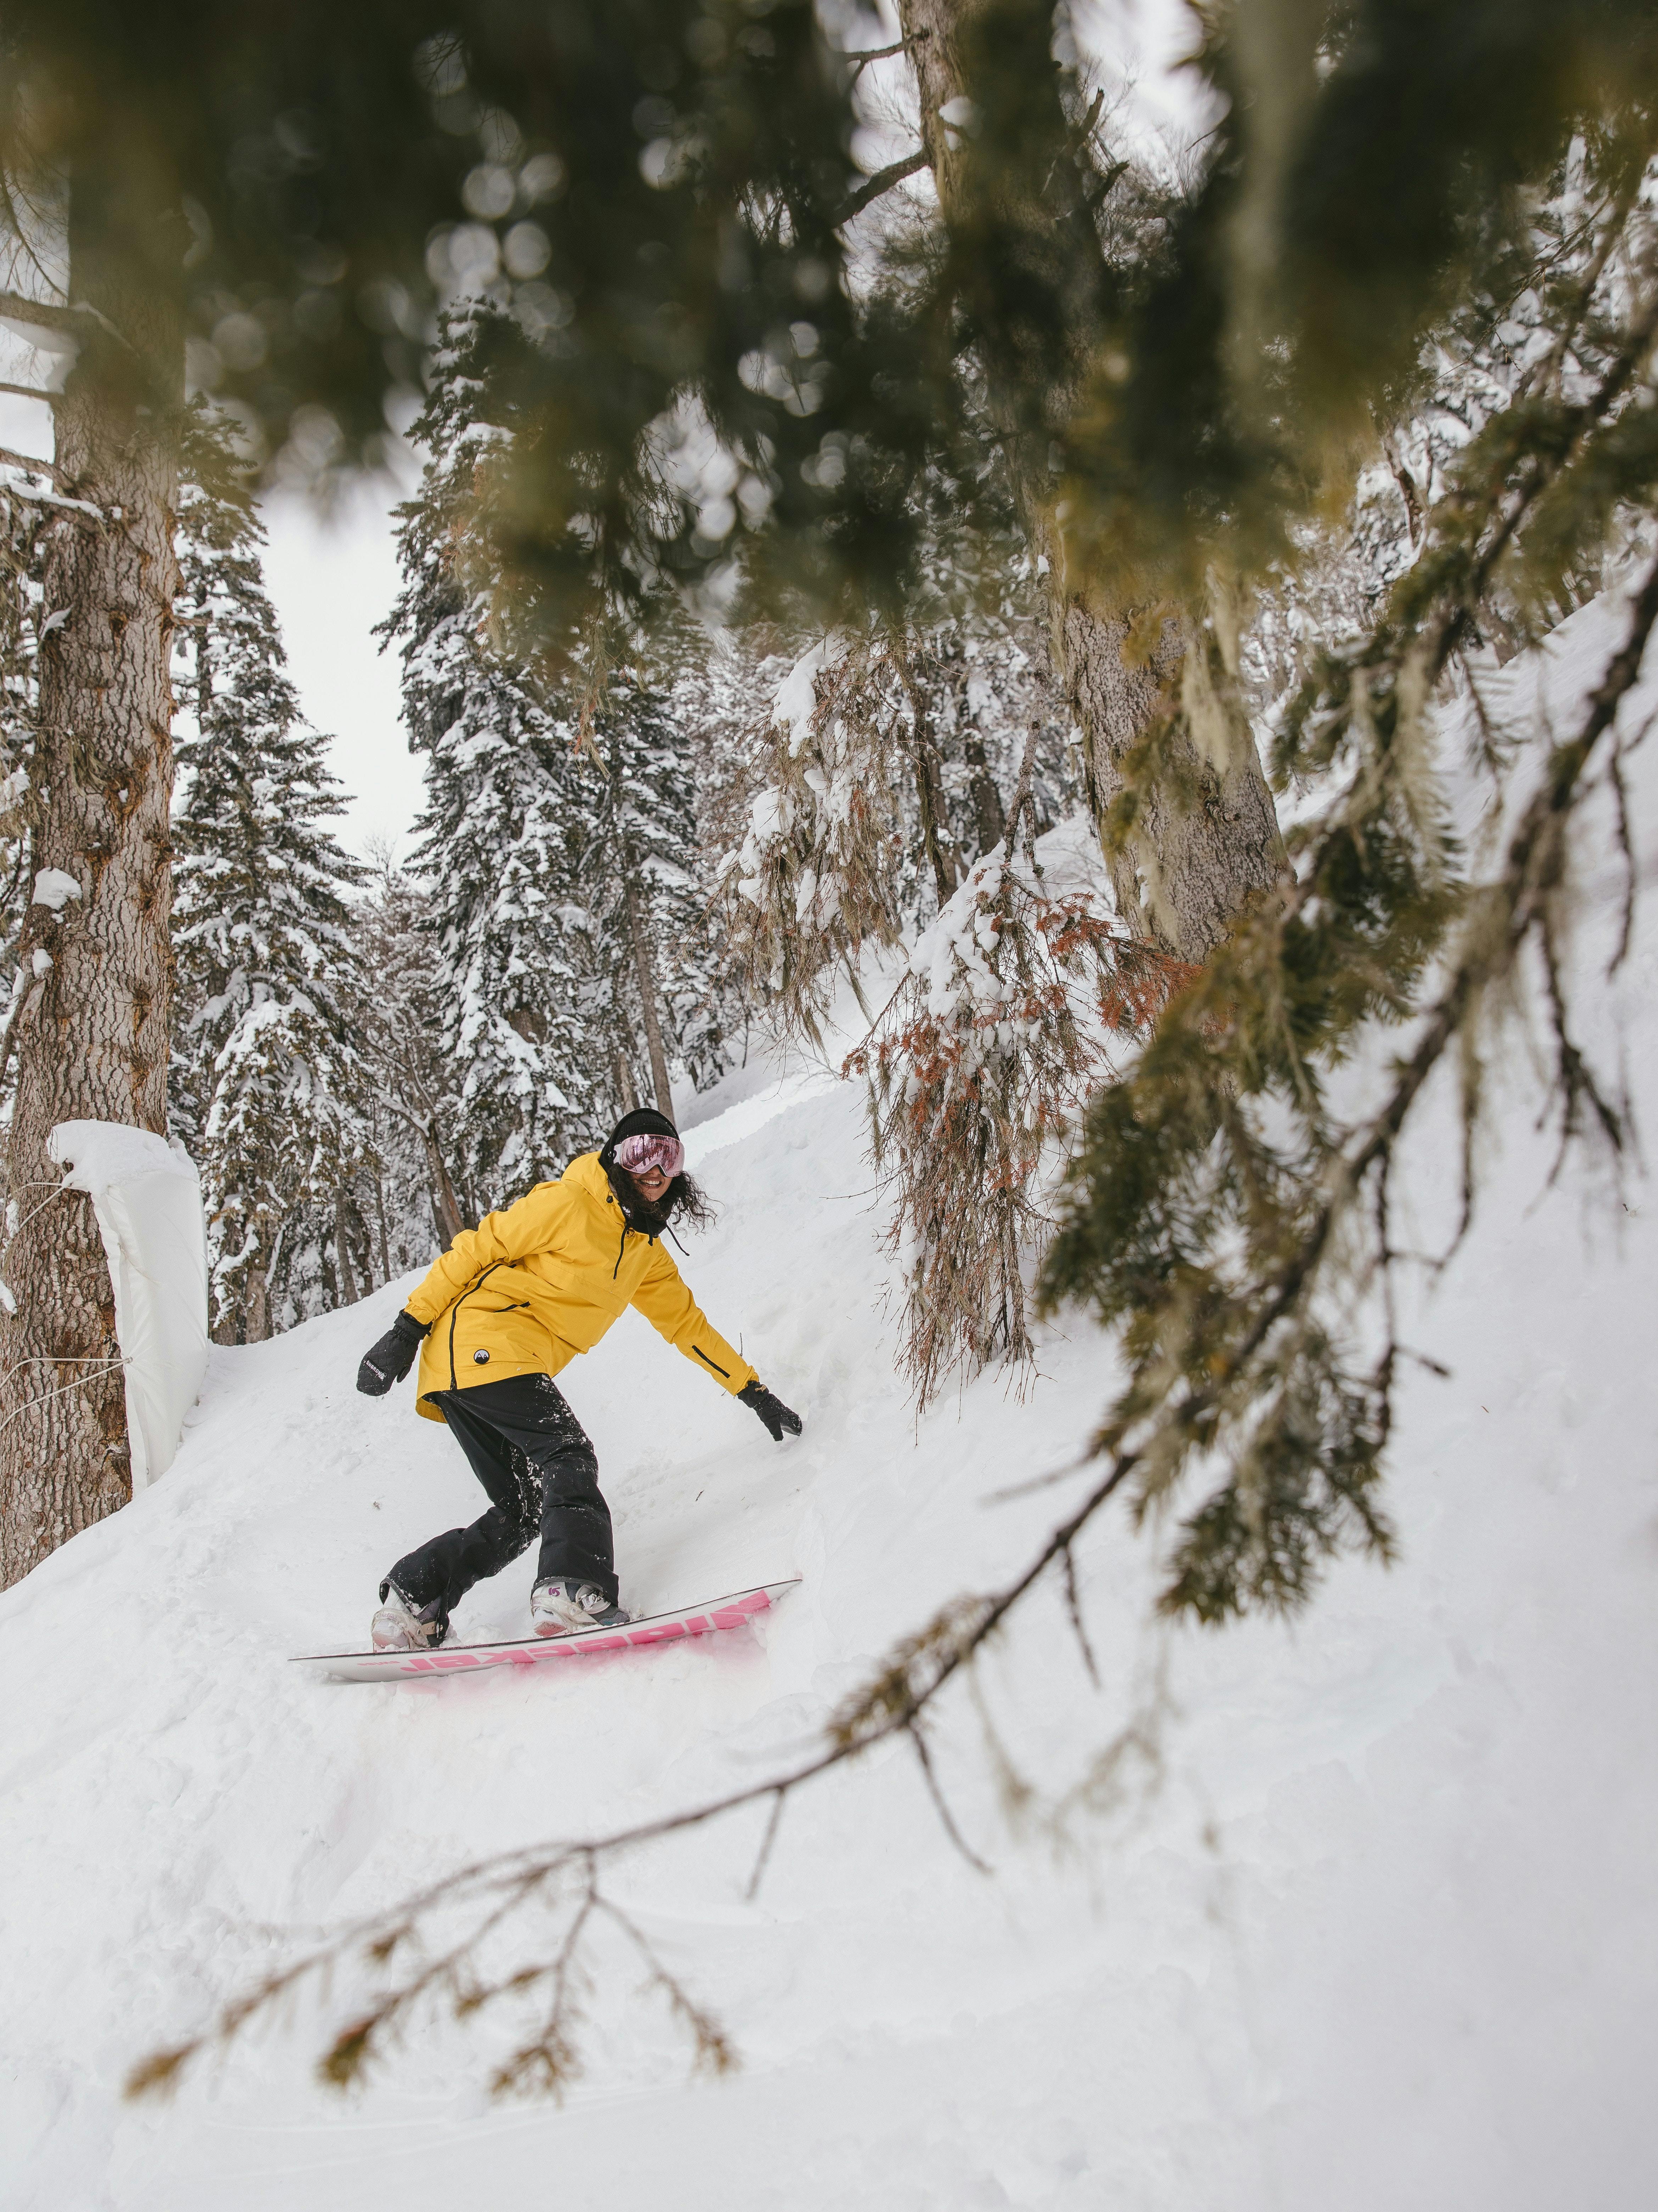 How to Snowboard Trees and Ride the Glades | Curated.com